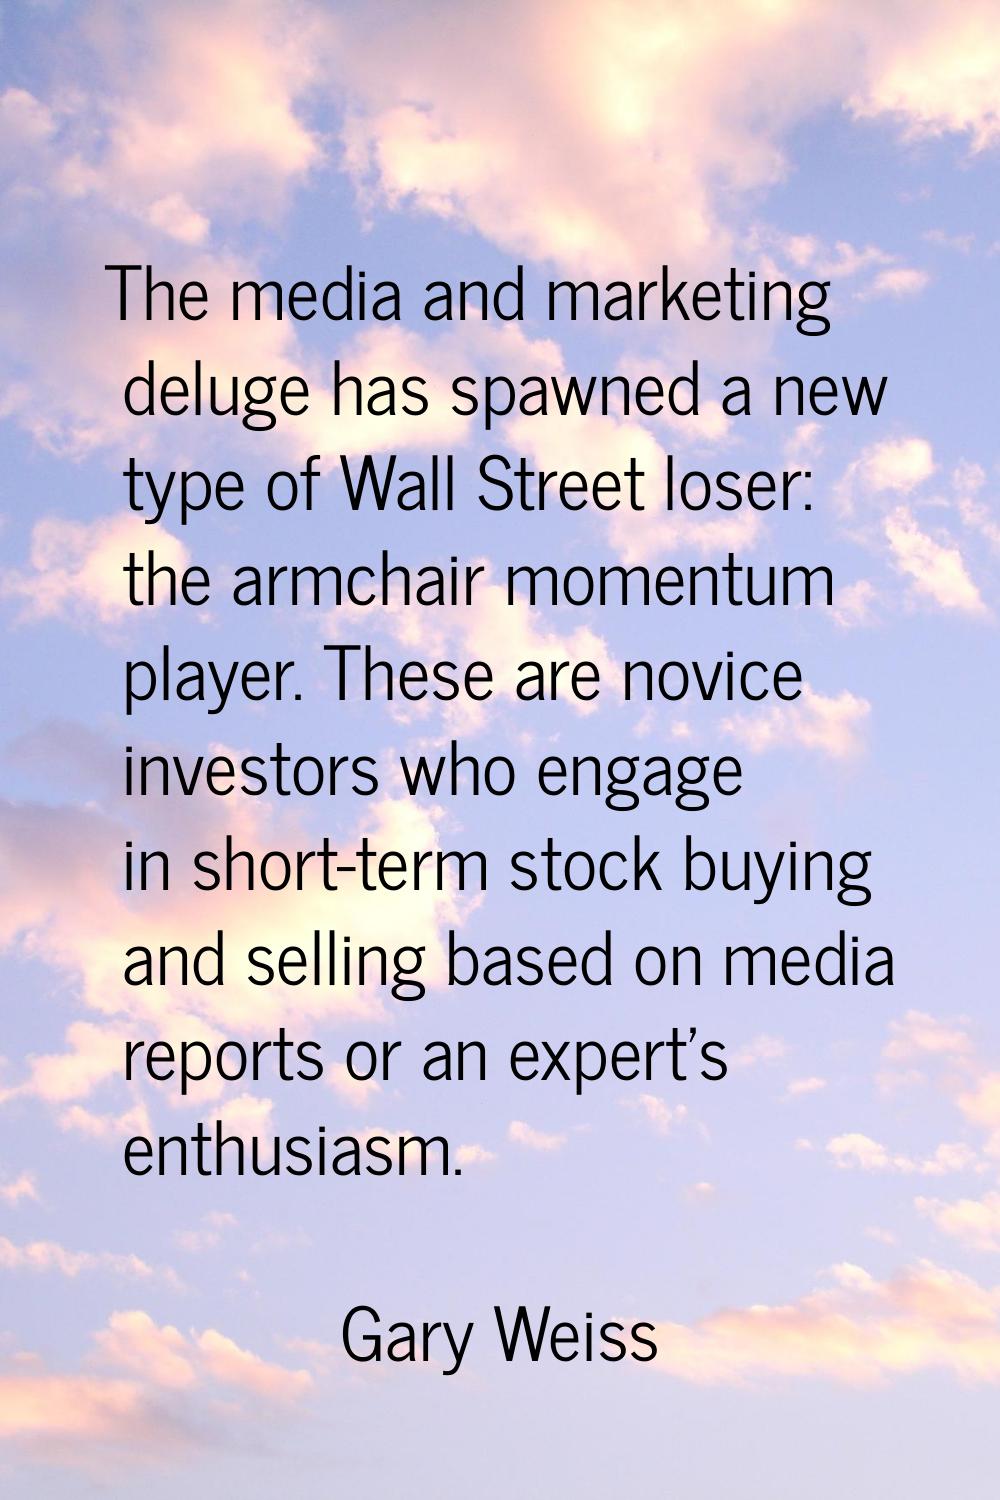 The media and marketing deluge has spawned a new type of Wall Street loser: the armchair momentum p